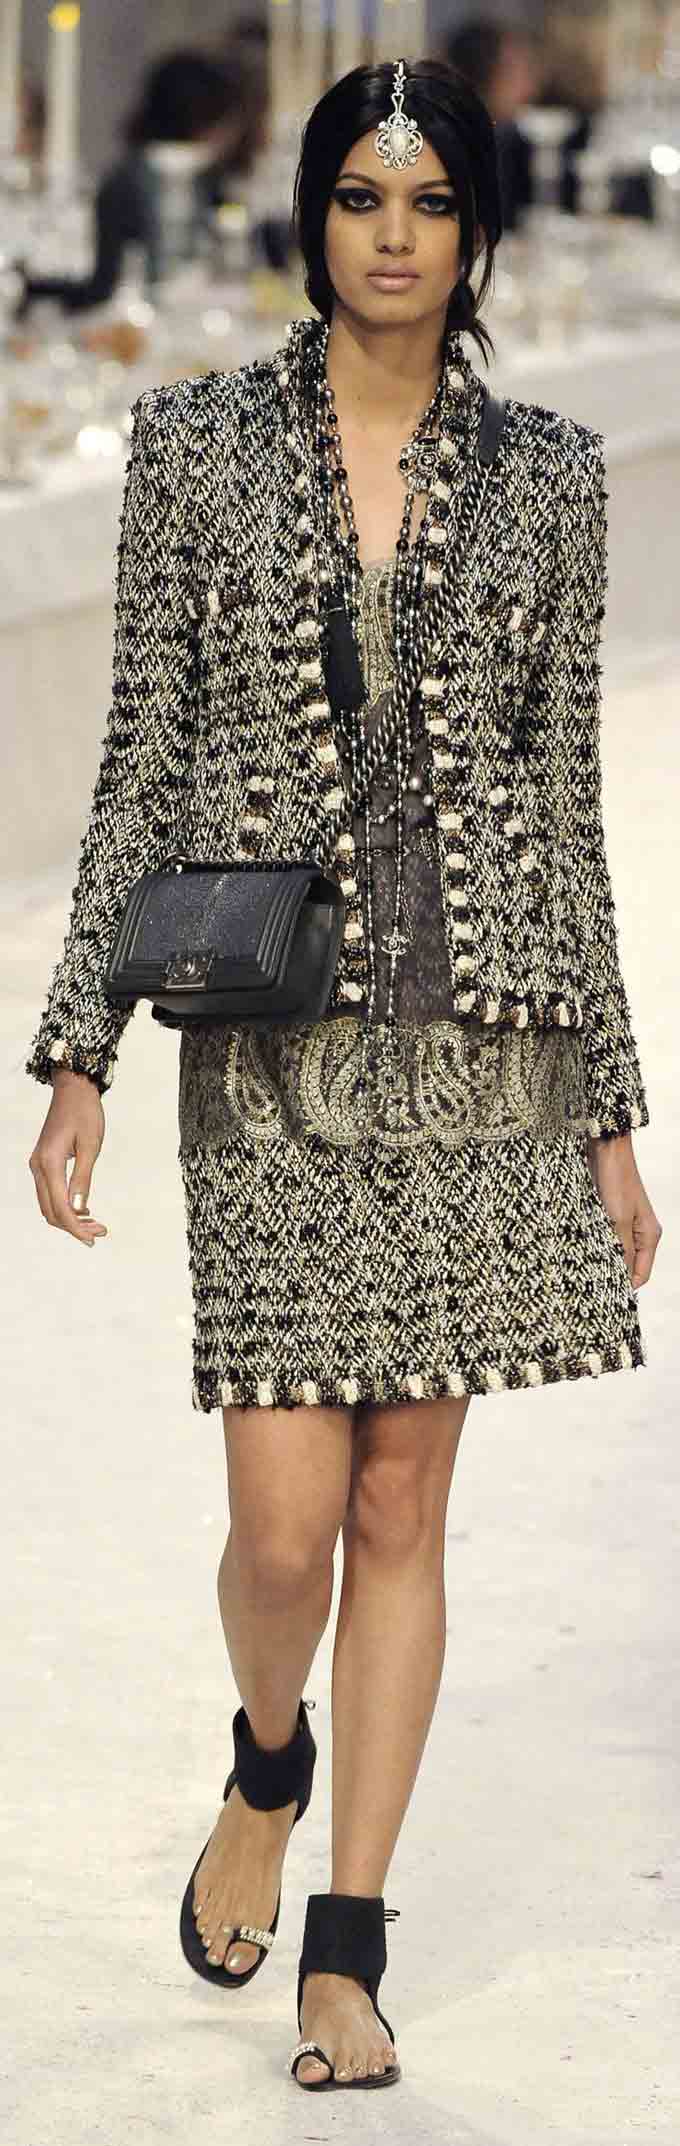 Chanel's PreFall '12: The Bombay Collection